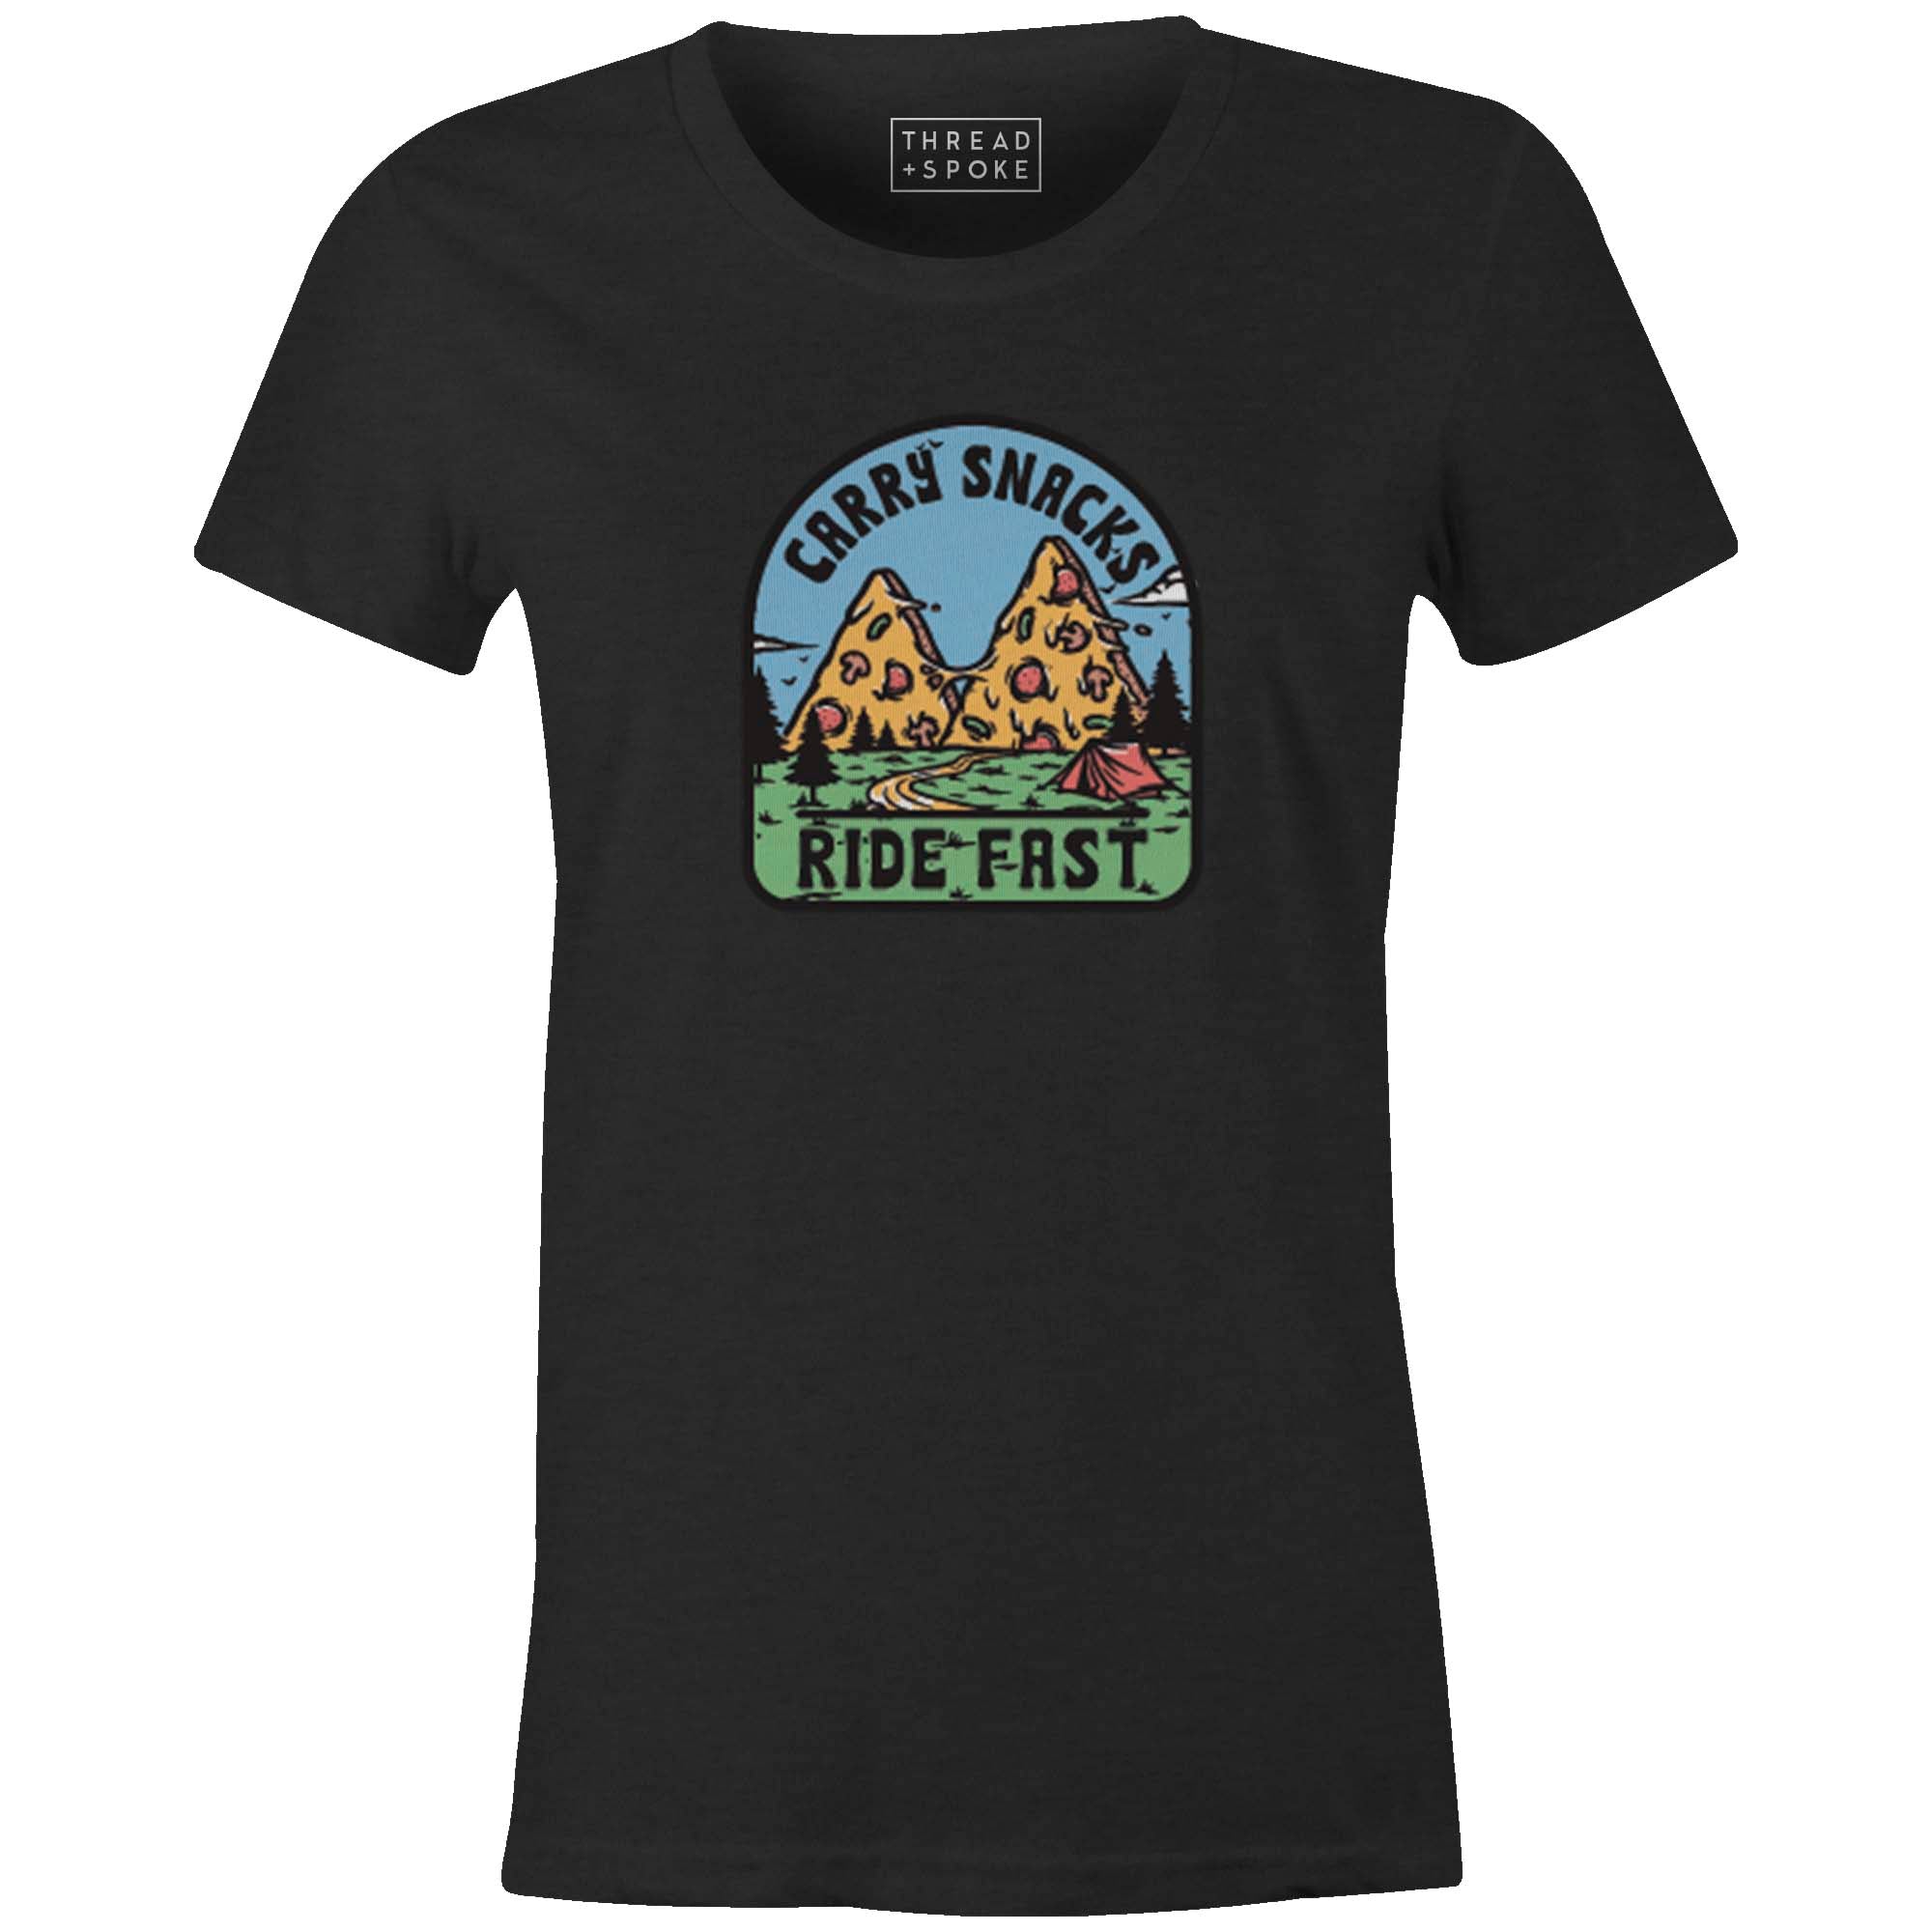 Women's T-shirt - Carry Snacks Ride Fast